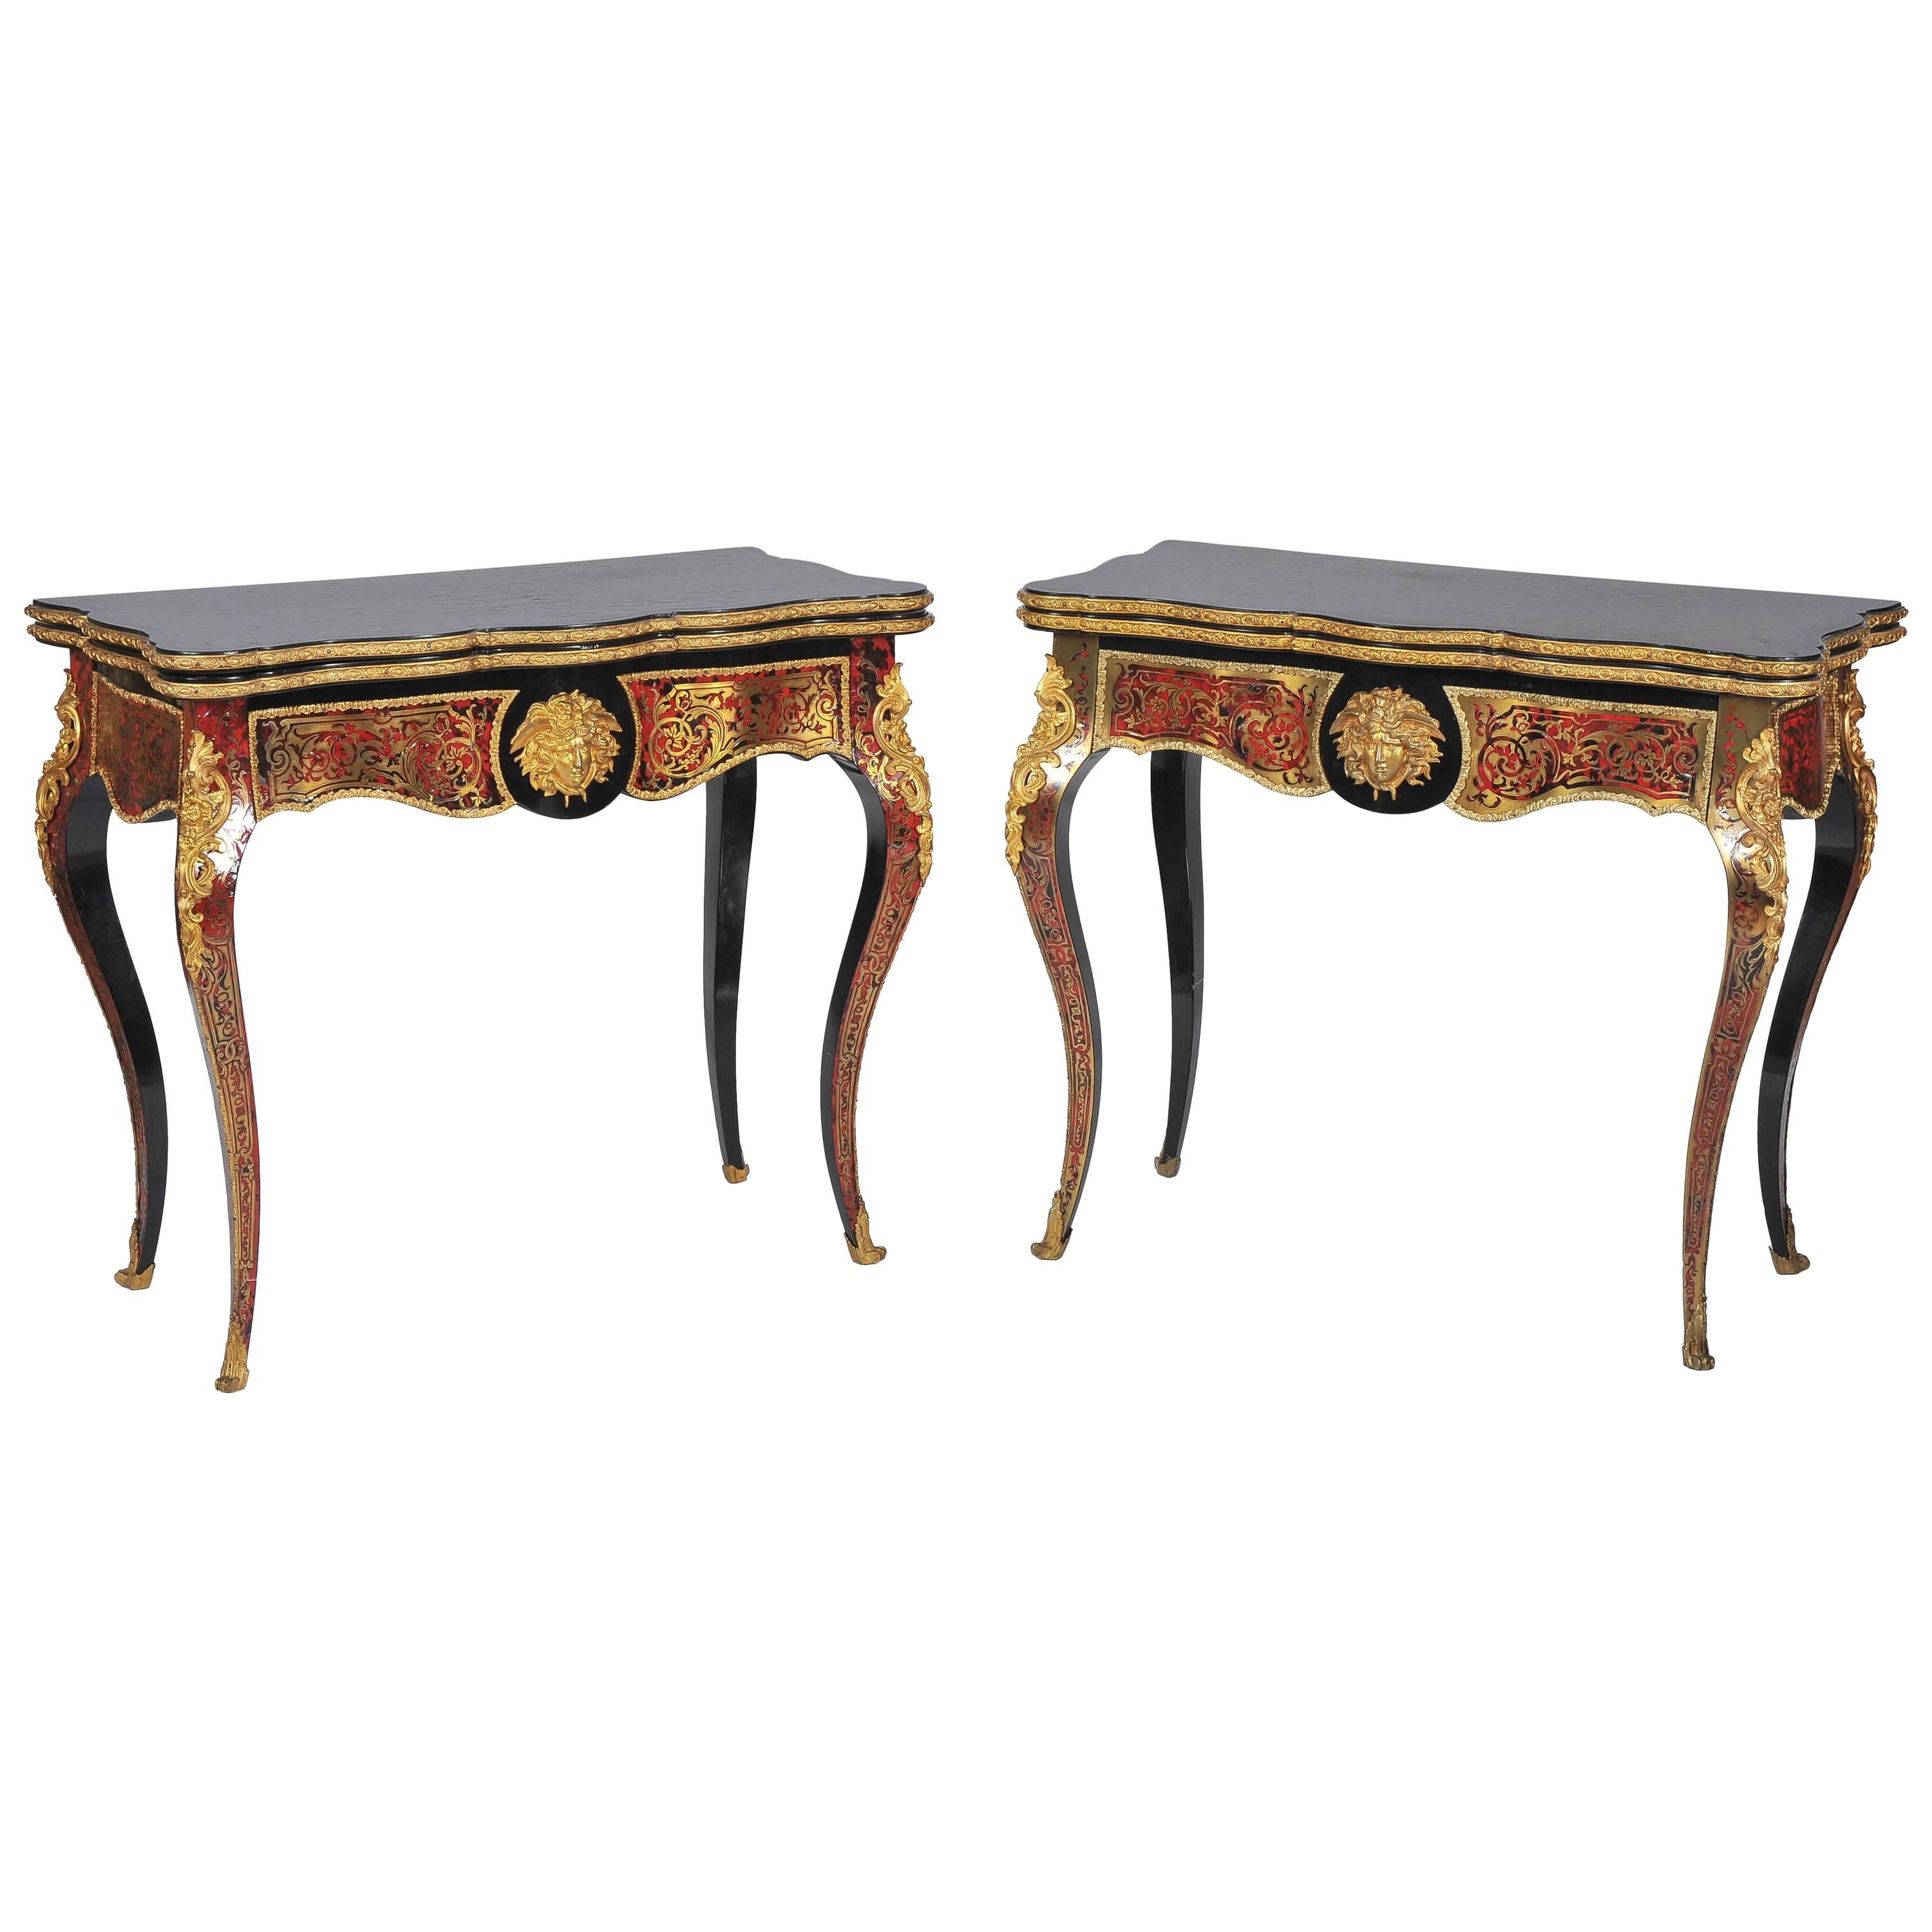 Pair of Ornate 19th C. Card Tables after Boulle 